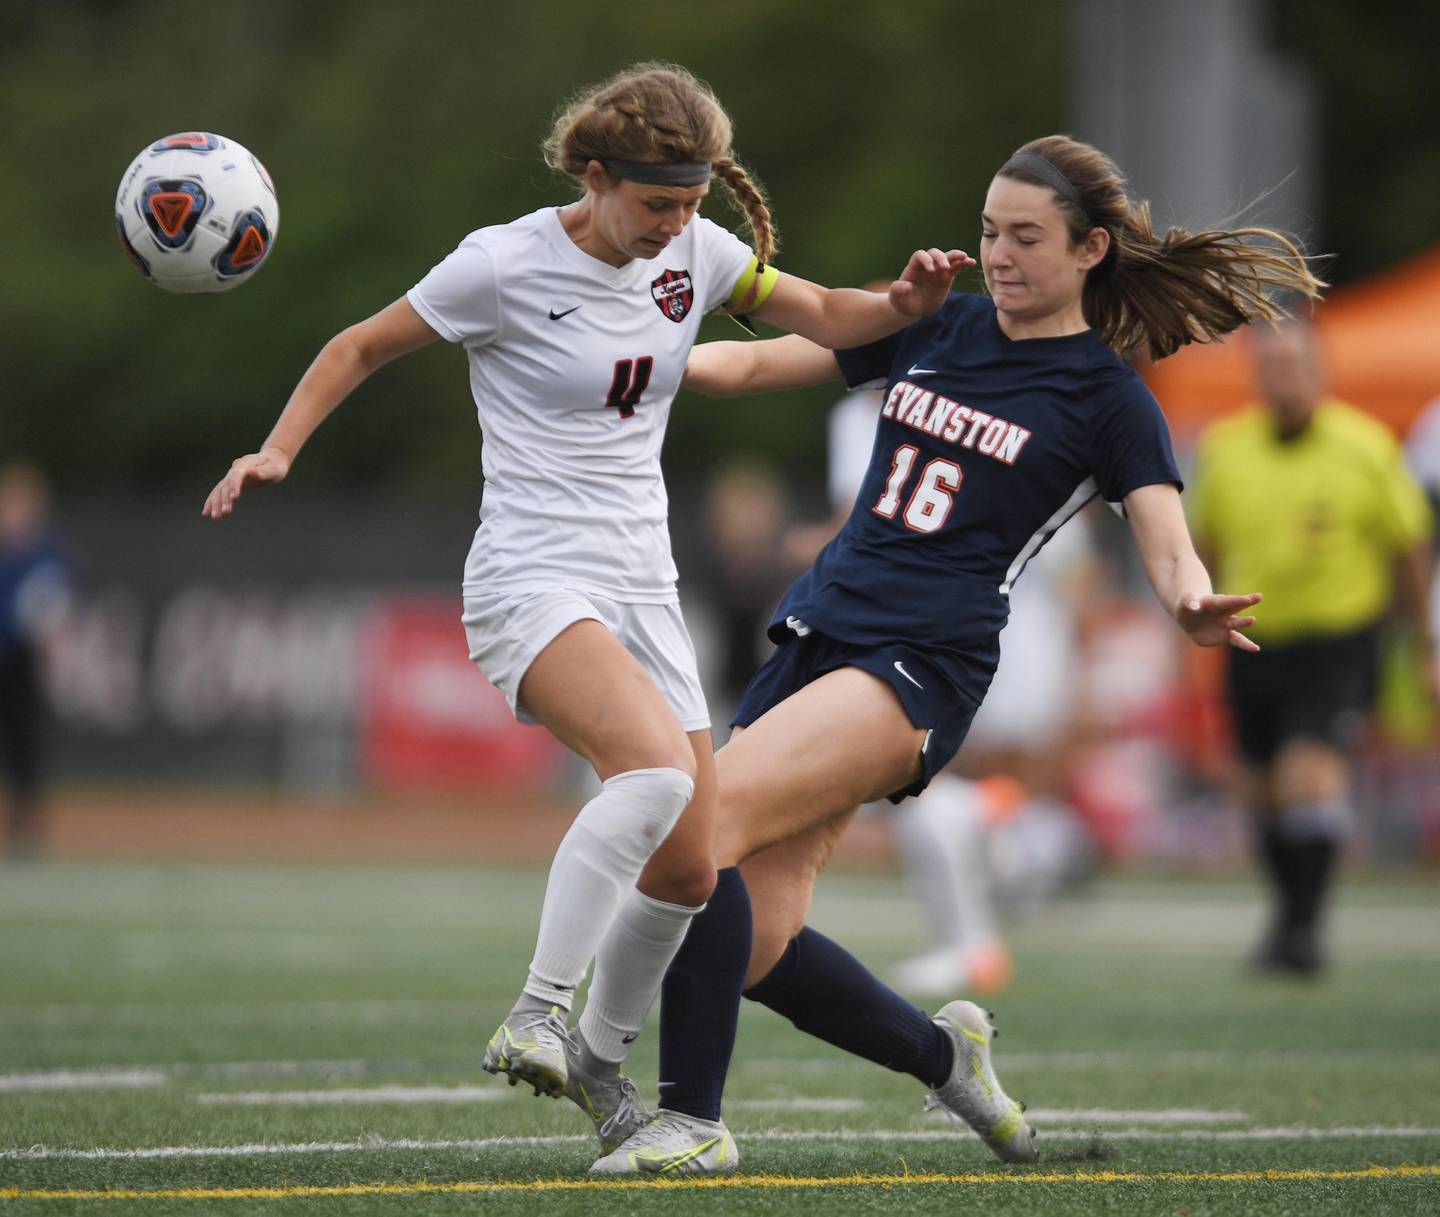 Lincoln-Way Central’s Christine Erdman and Evanston’s Carly Menocal compete in the Class 3A IHSA state girls soccer third-place game in Naperville on Saturday, June 4, 2022.